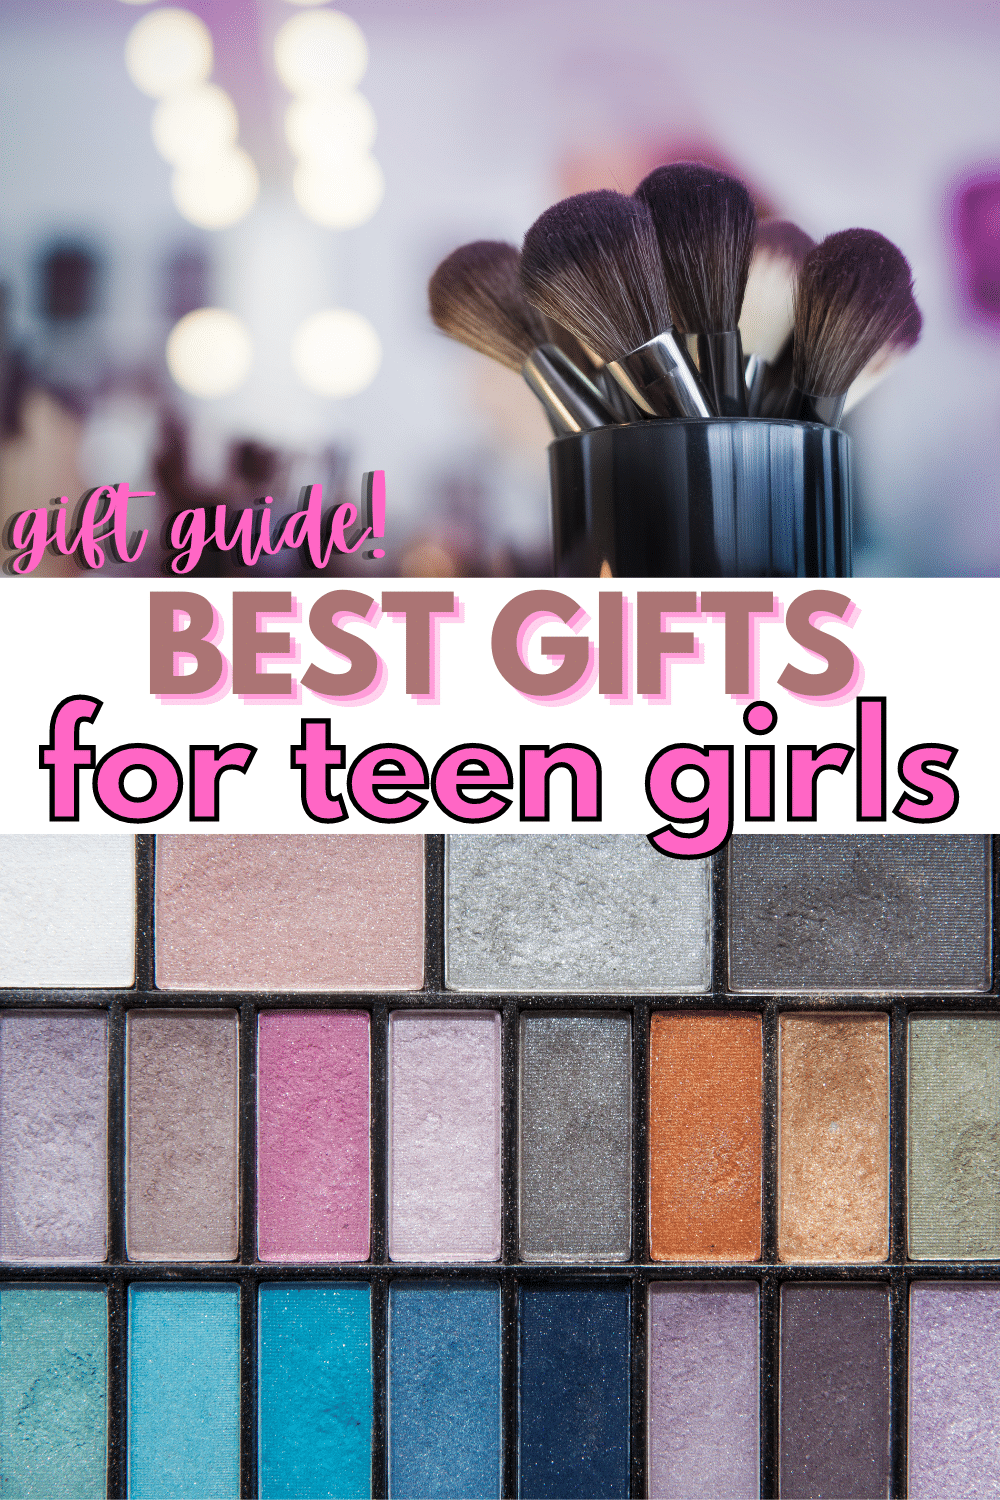 Best Gifts for Teen Girls